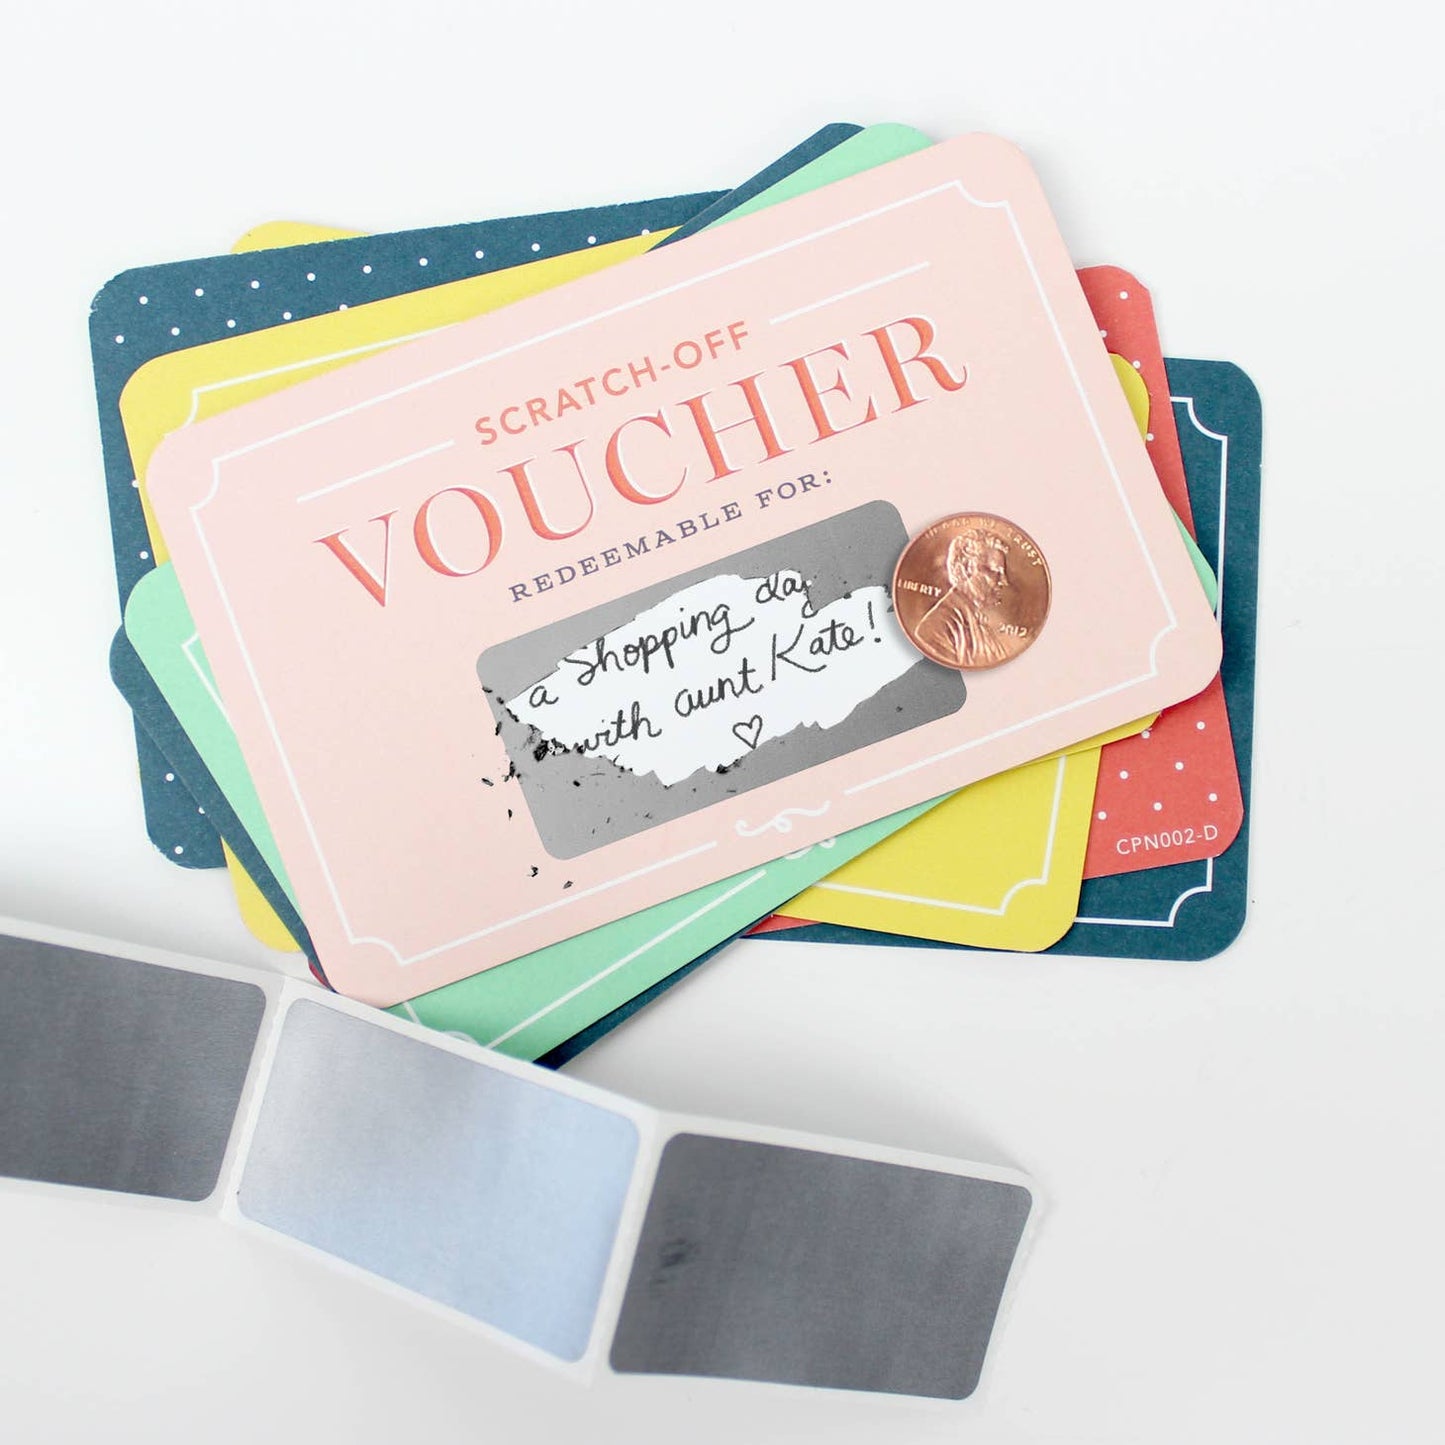 Scratch-off Vouchers from Favorite Little Things